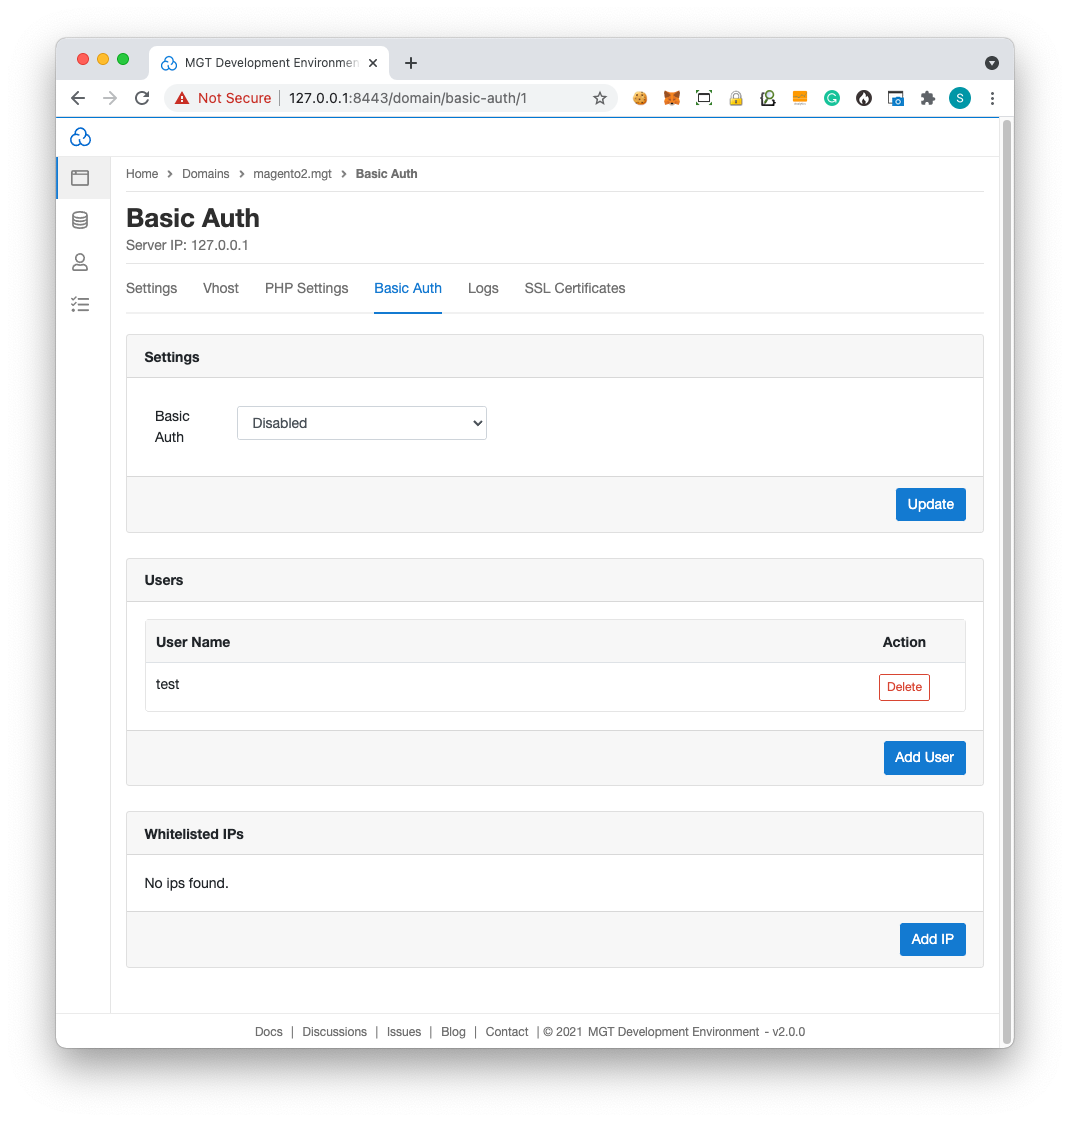 Basic Auth. Enable or Disable - Local Development Environment